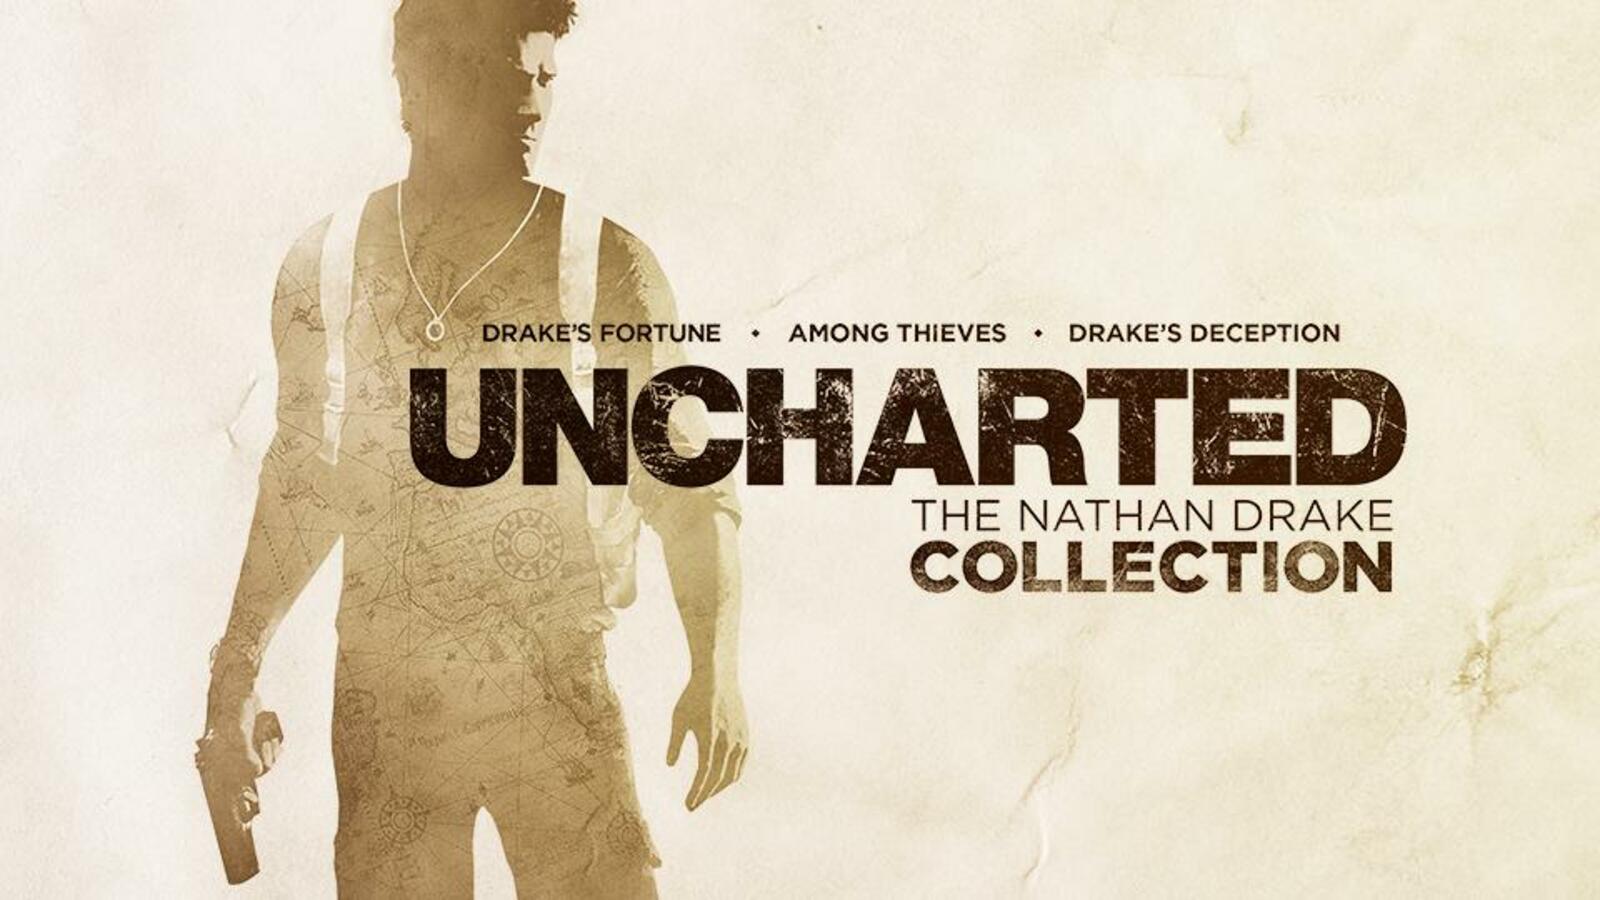 Uncharted the nathan drake collection file size is over gb